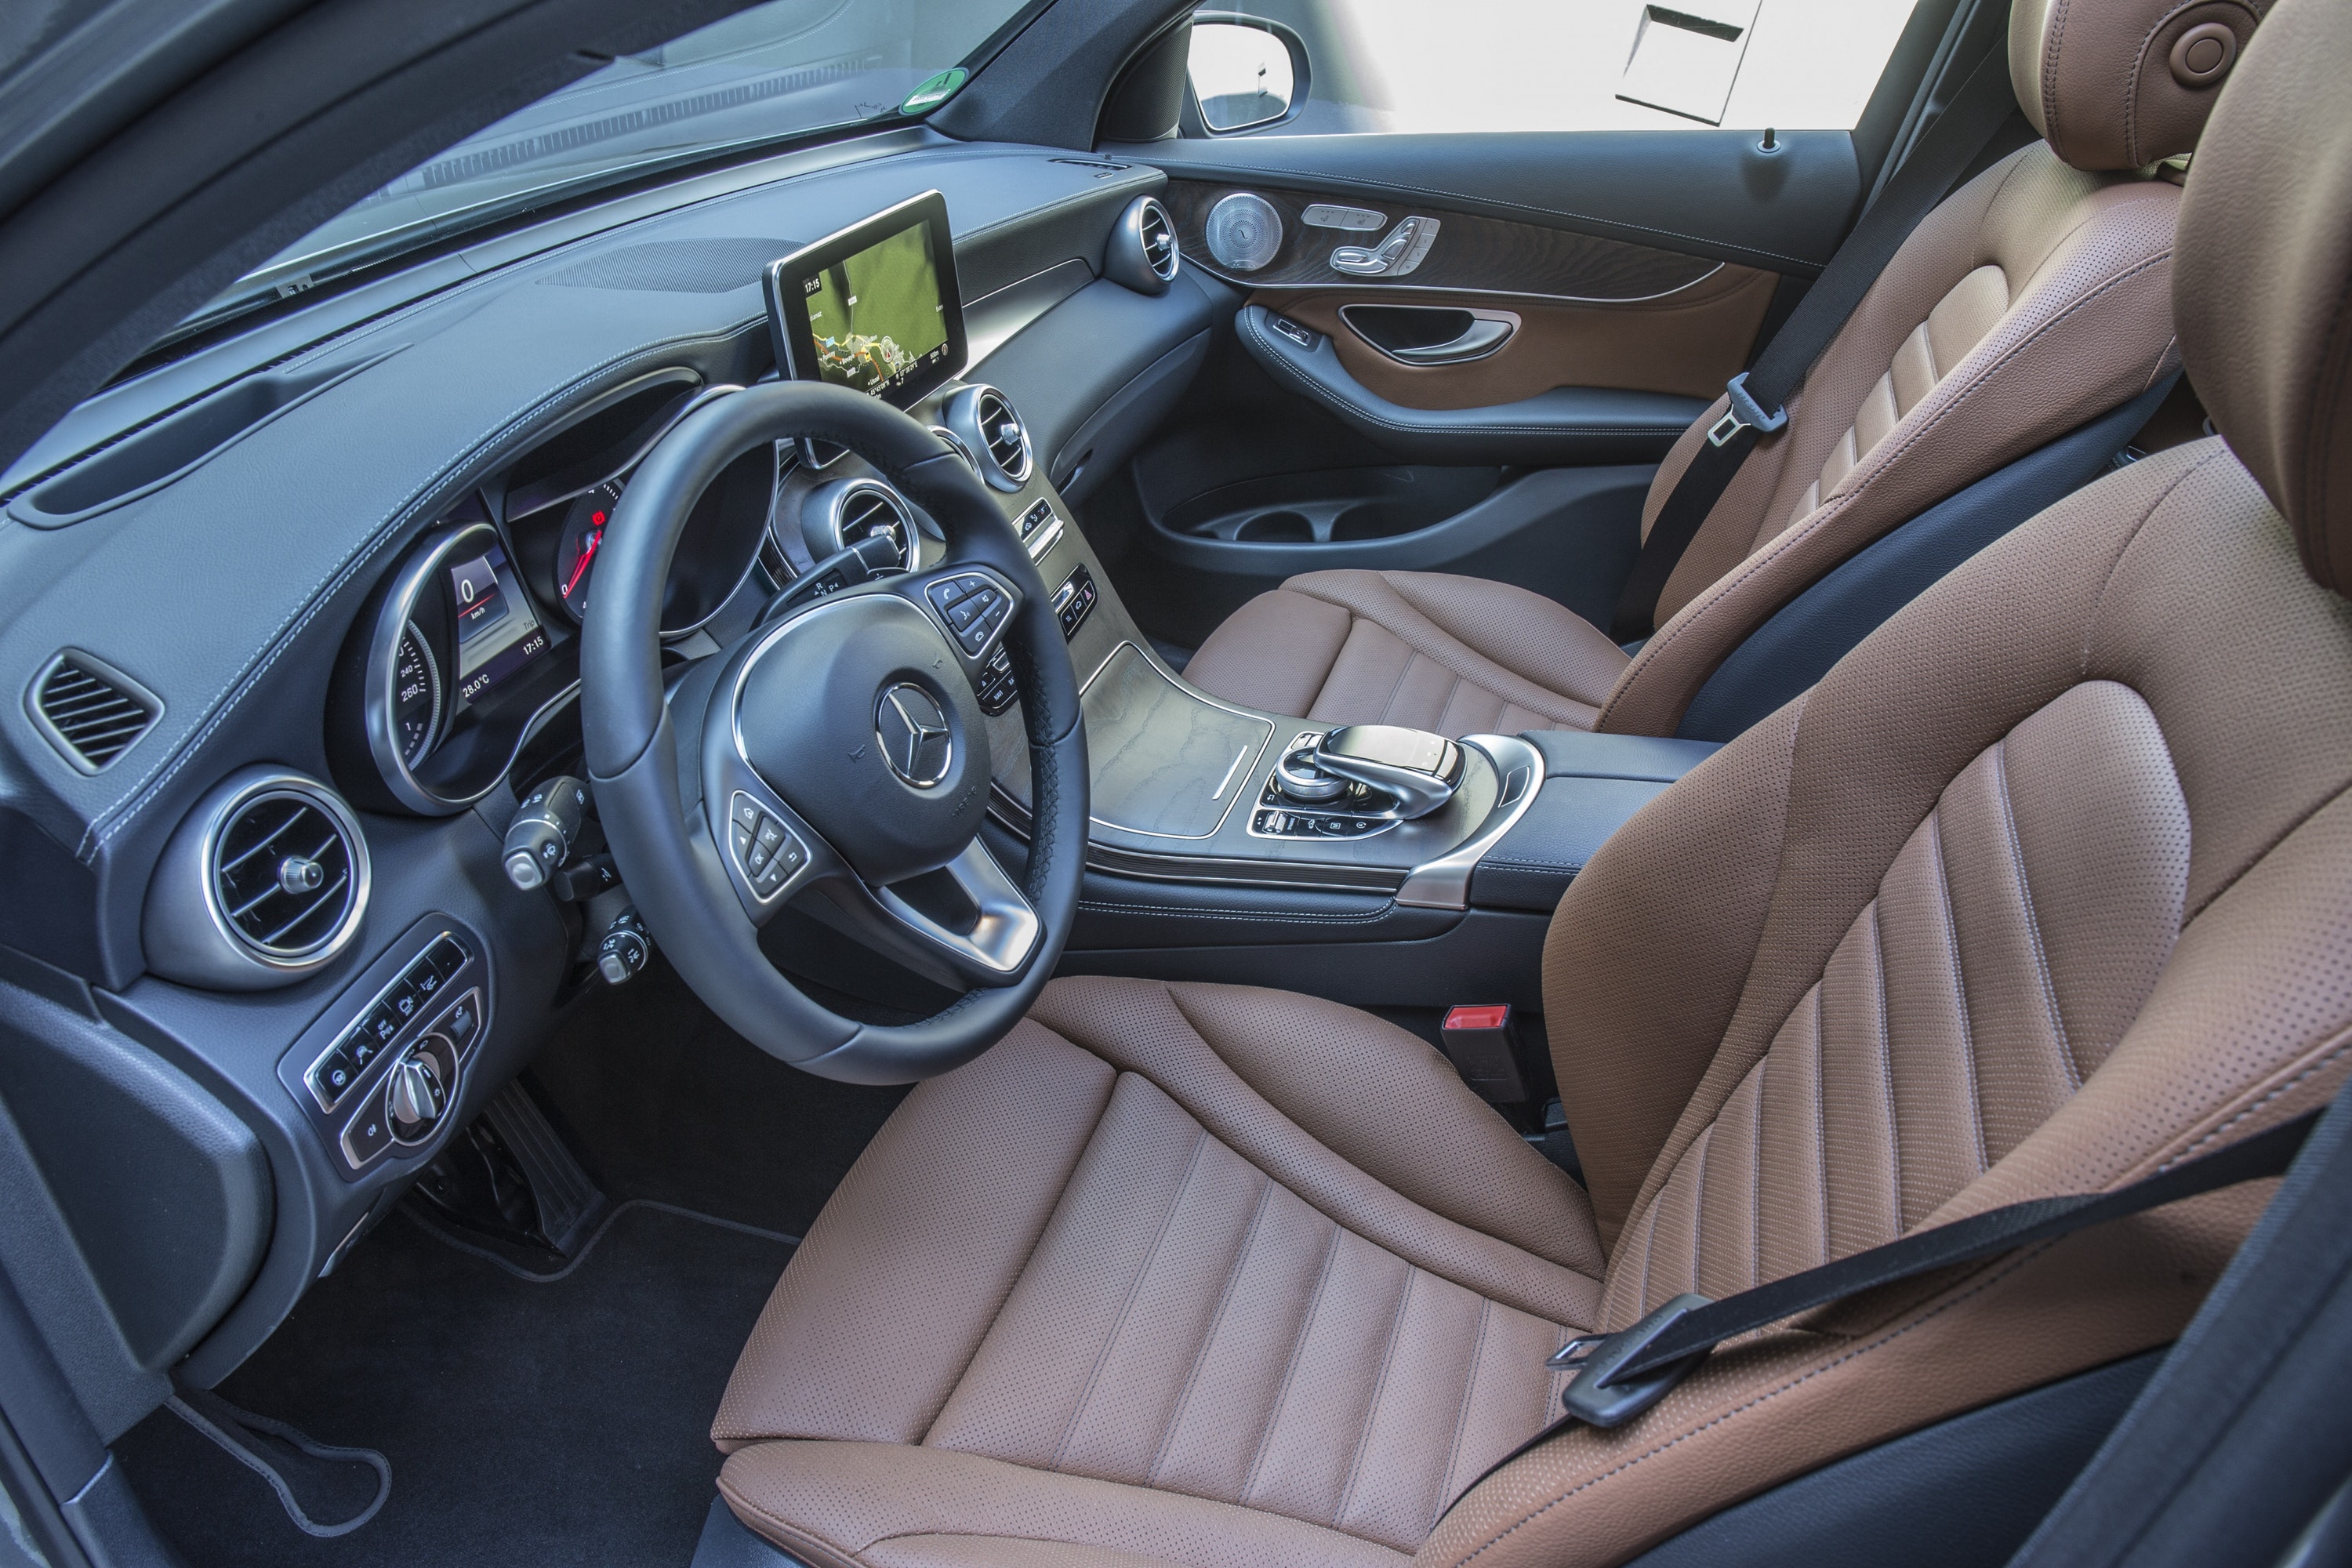 The interior is typically Merc, with a mix of leather and metallic detailing